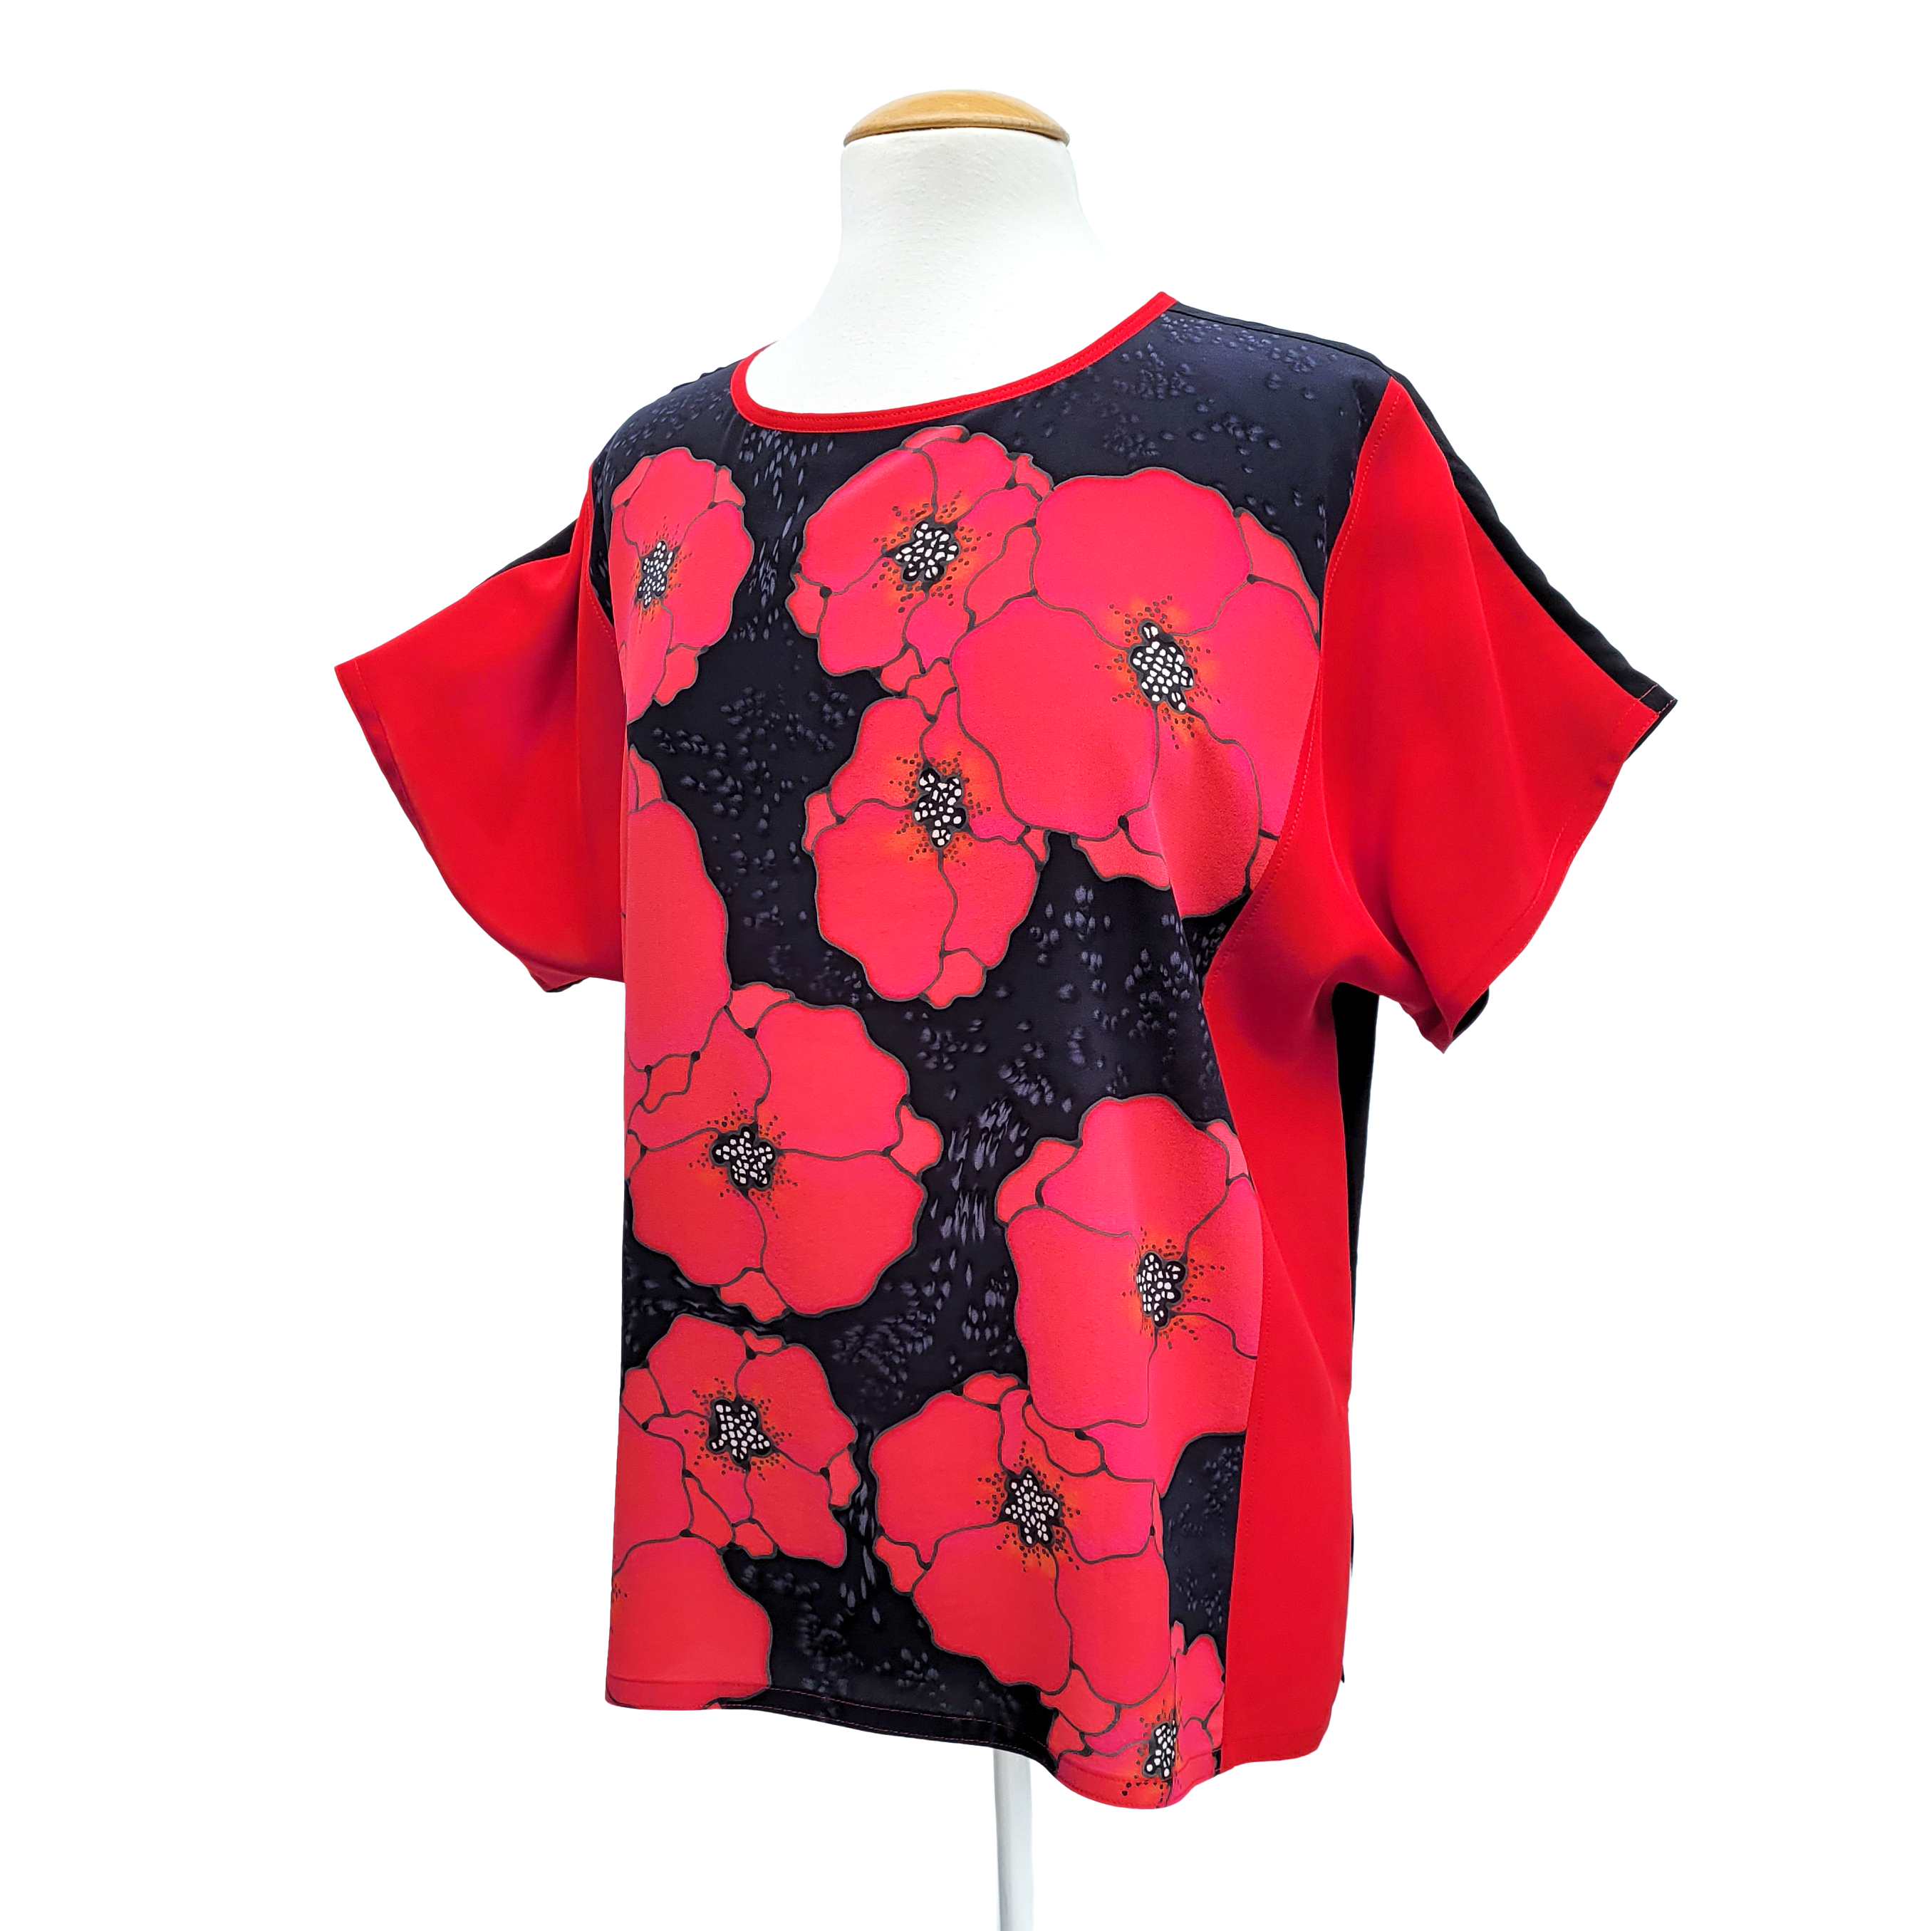 RED POPPIES ART TOP Hand Painted Pure Silk Loose Fitting